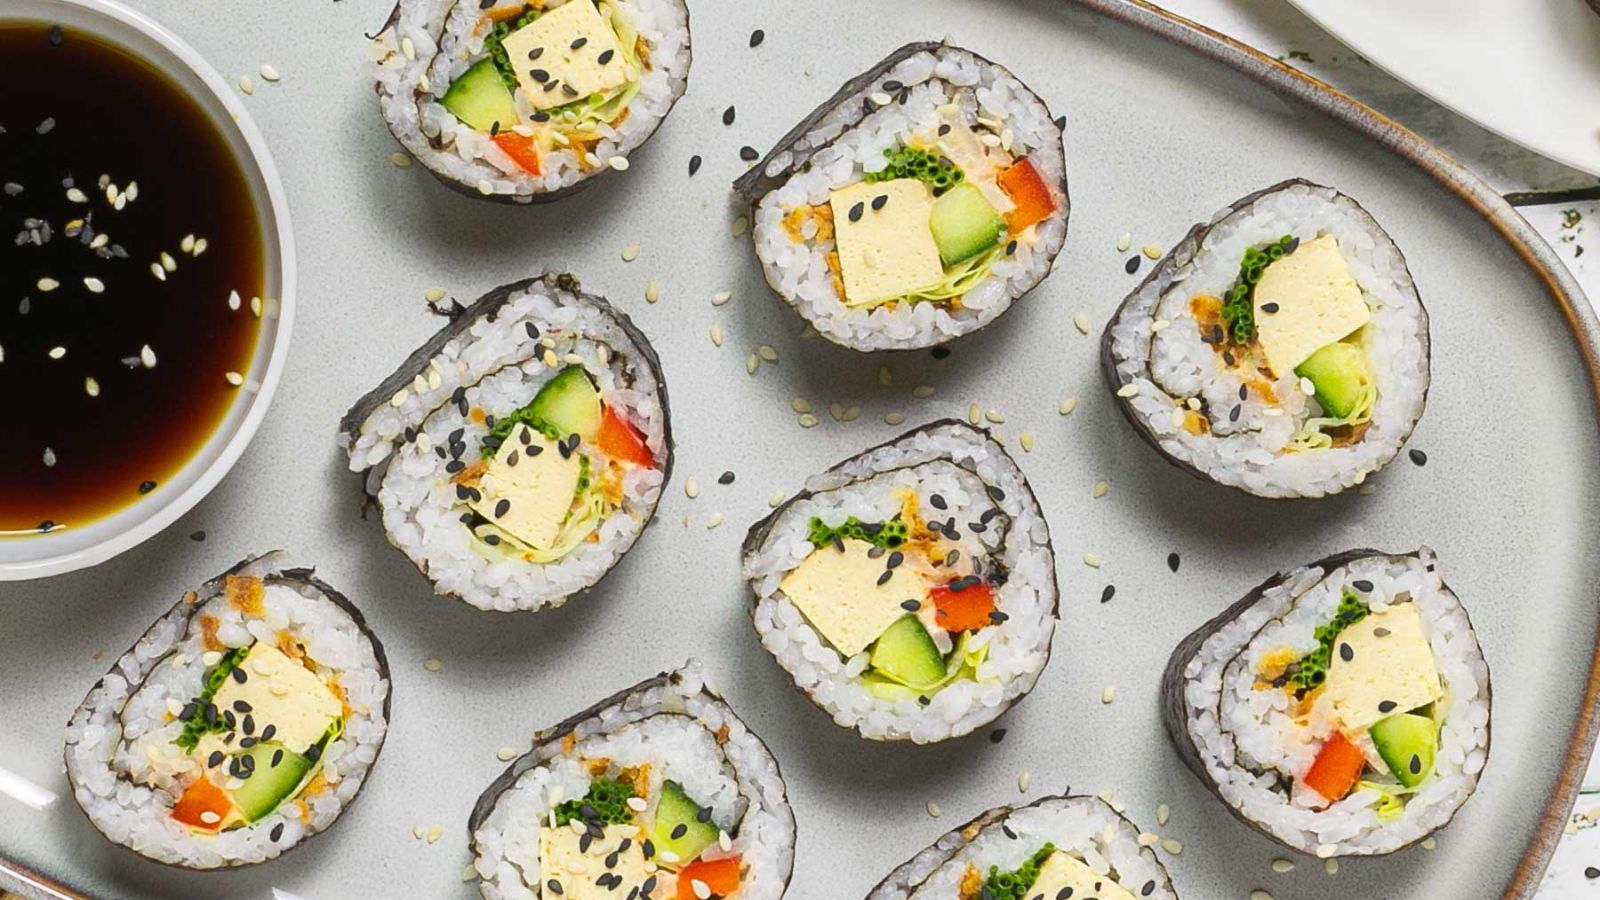 <p>This tofu sushi recipe combines smoked tofu, veggies, and a sriracha mayo to make delicious maki sushi rolls the entire family will love. You do not need to be a professional sushi chef to whip up this recipe.</p> <p><strong>Recipe: <a href="https://mypureplants.com/tofu-sushi-rolls/">tofu sushi rolls</a></strong></p>